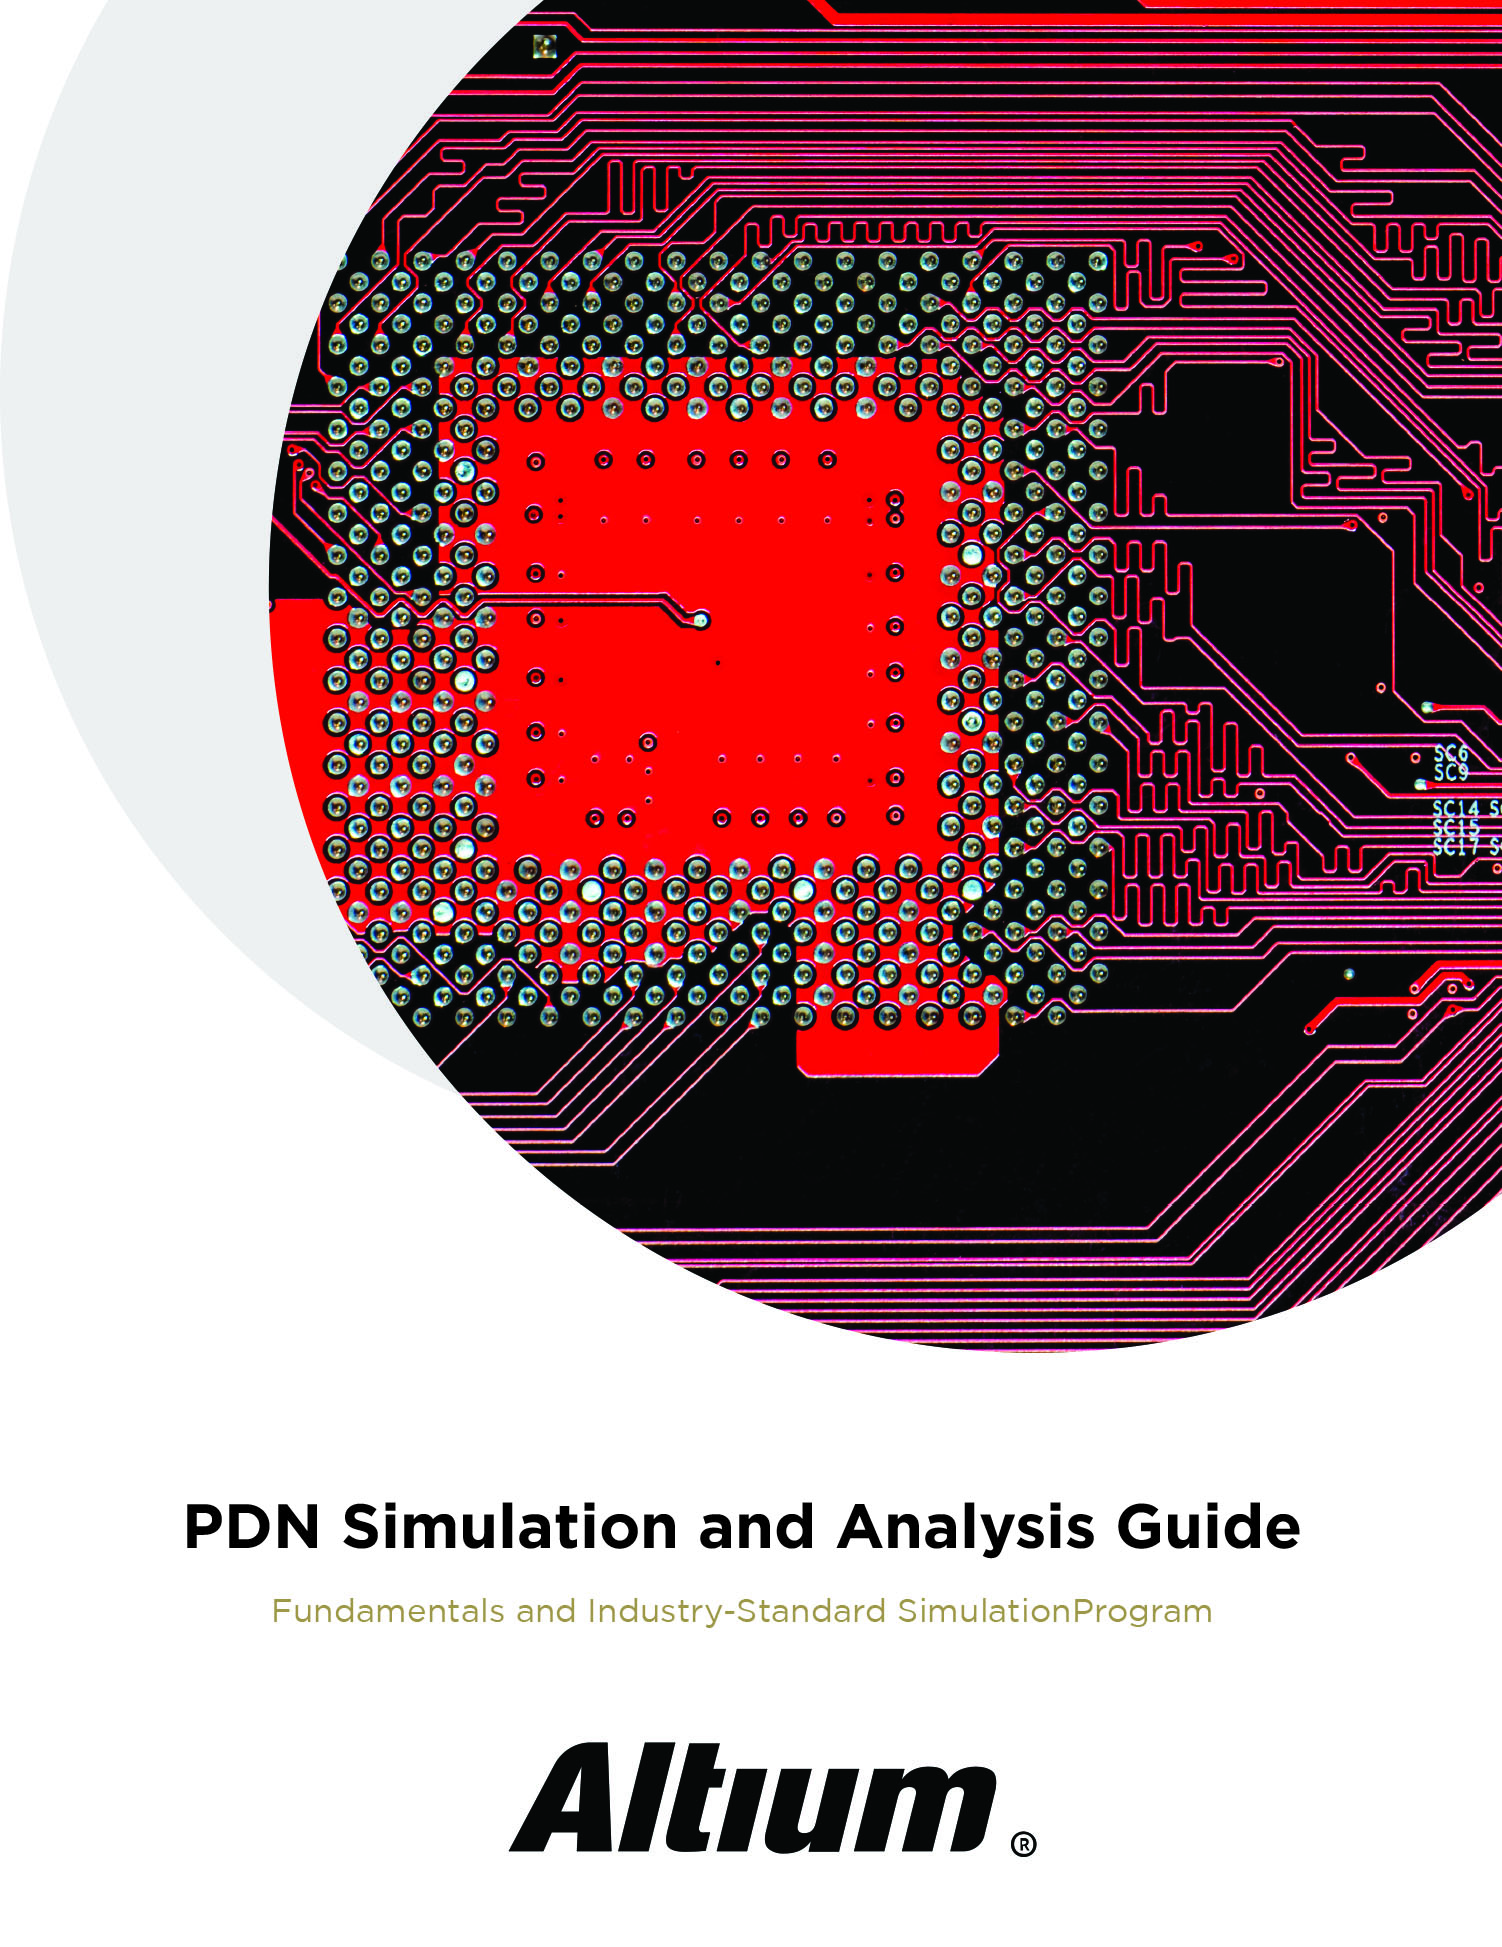 Guide to PDN Simulation and Analysis Guide